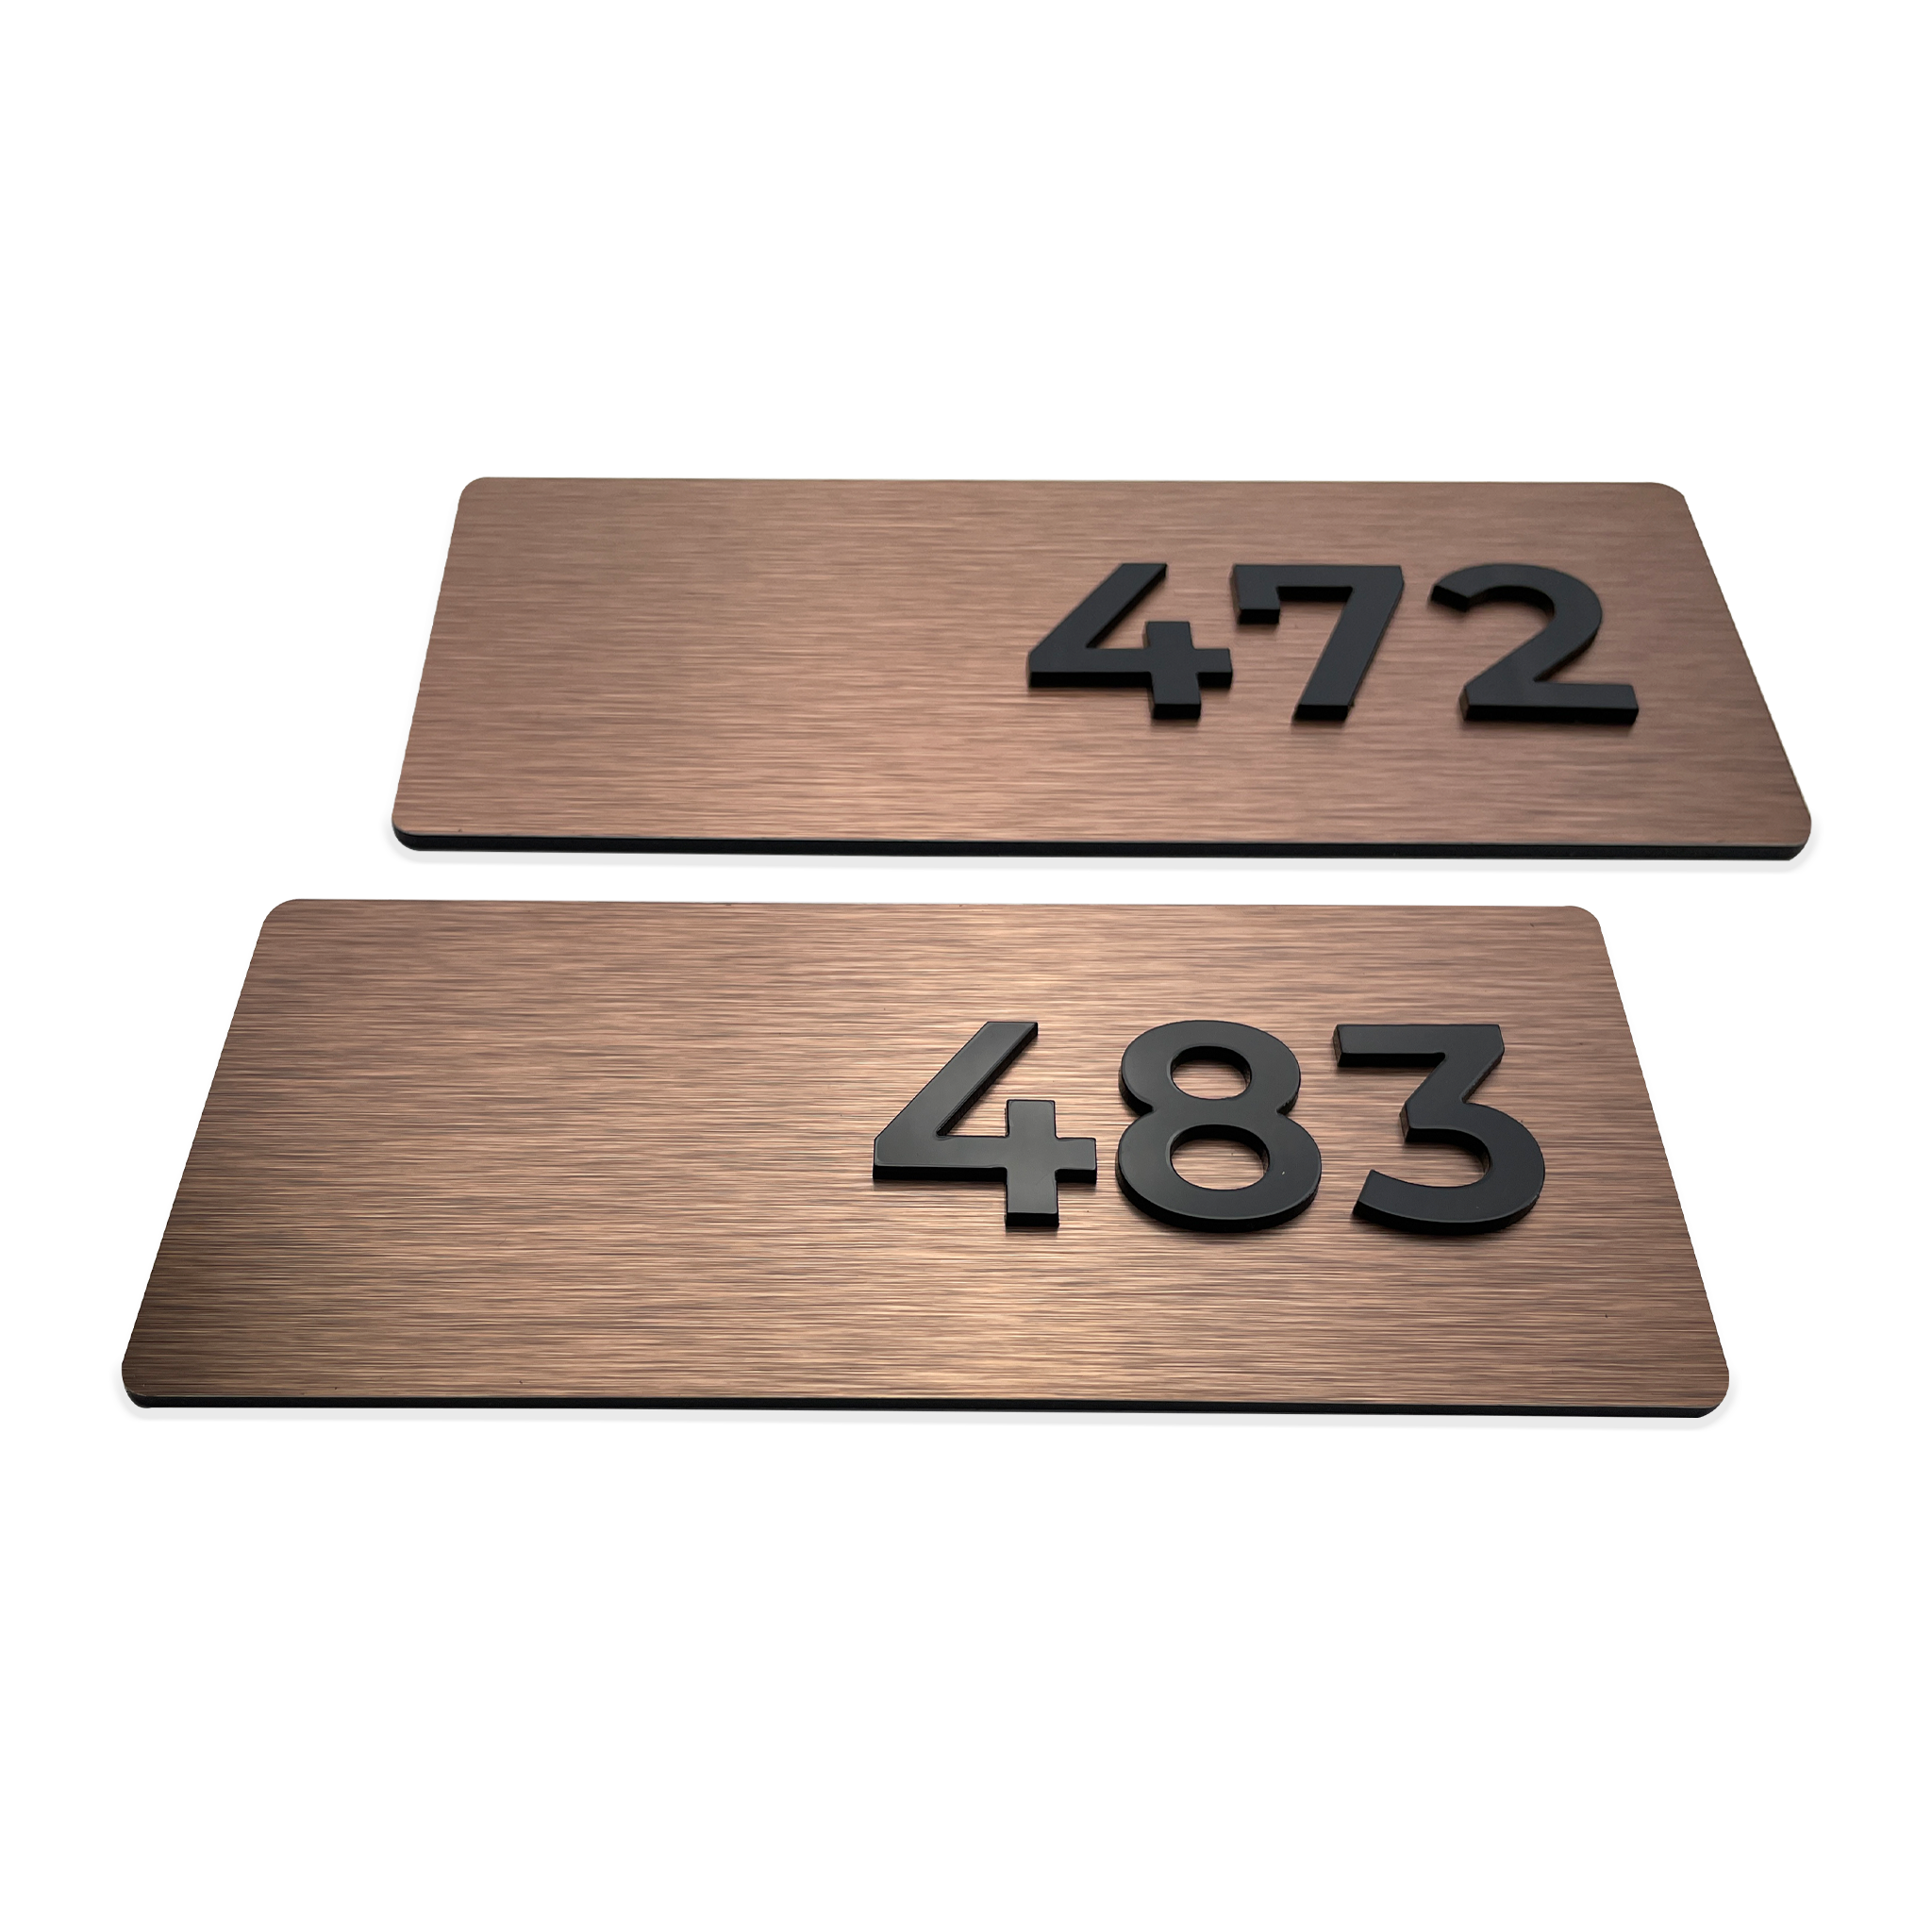 BRONZE APARTMENT NUMBER SIGNS